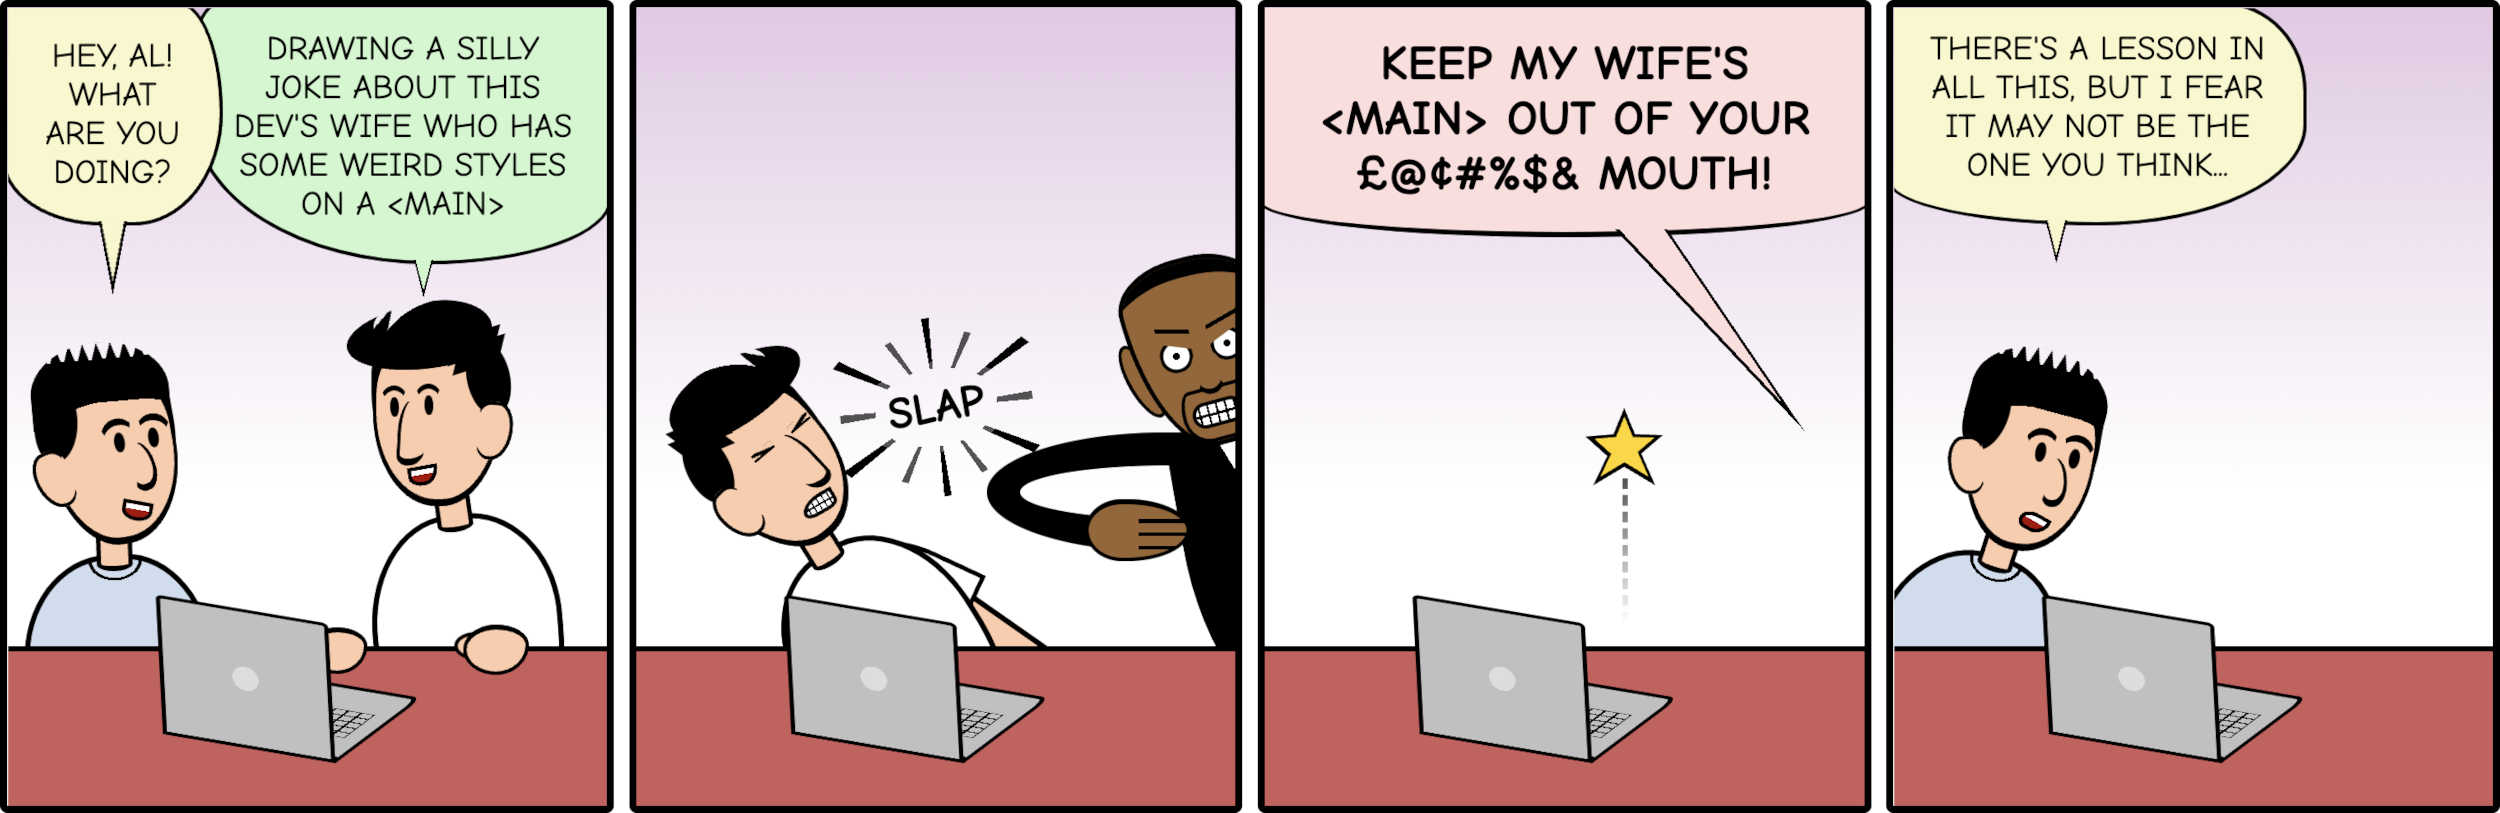 Cartoon with 4 panels similar to a previous cartoon by Stephan Pastis. In the first panel two men are talking: 'hey, Al! What are you doing?' and 'Drawing a silly joke about this devs wife who has some weird styles on a main element'. The second panel has Will Smith slapping the man that said the last part (who drops to the floor). In the third panel (outside of frame), Will Smith yells 'Keep my wifes main out of your [expletive] mouth!'. In the last panel, the first man says to the one on the floor: 'There is a lesson in all this, but I fear it may not be the one you think'.